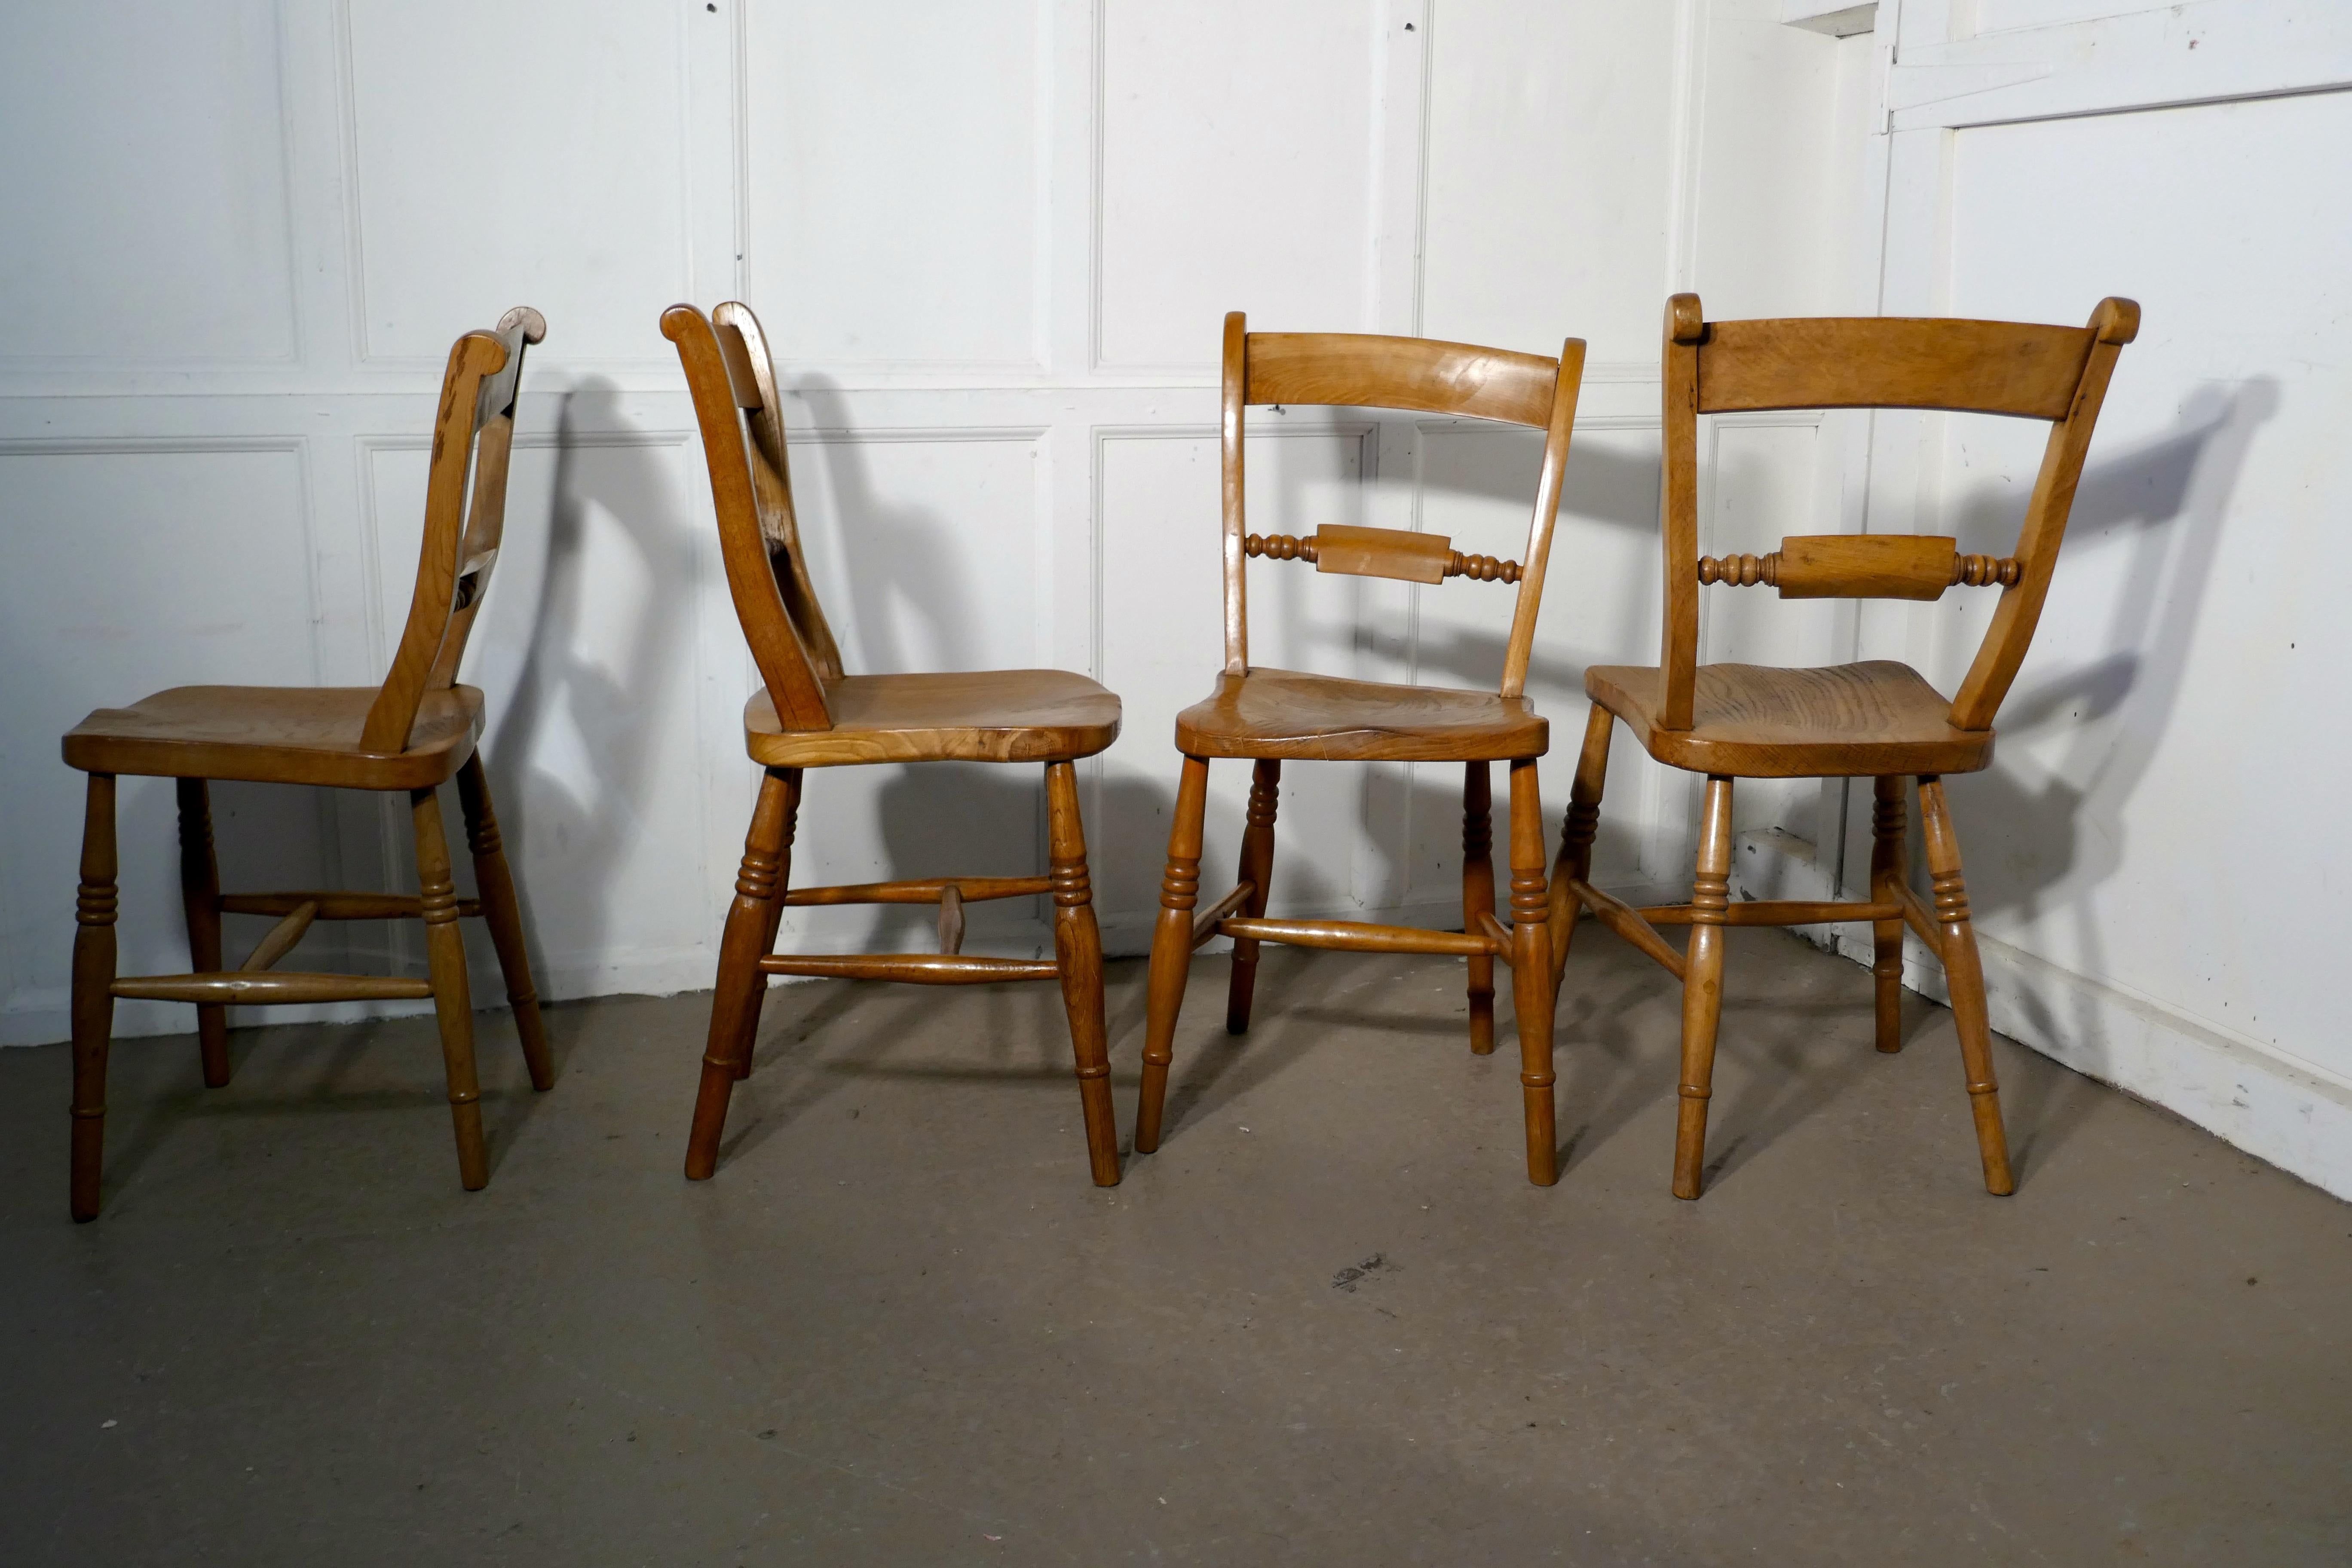 Harlequin set of 4 Victorian beech and elm rope back kitchen dining chairs.

These chairs are all the same style though there are some differences in the detail of the wood turnings
These are a good rustic set of chairs, the joints are all good,